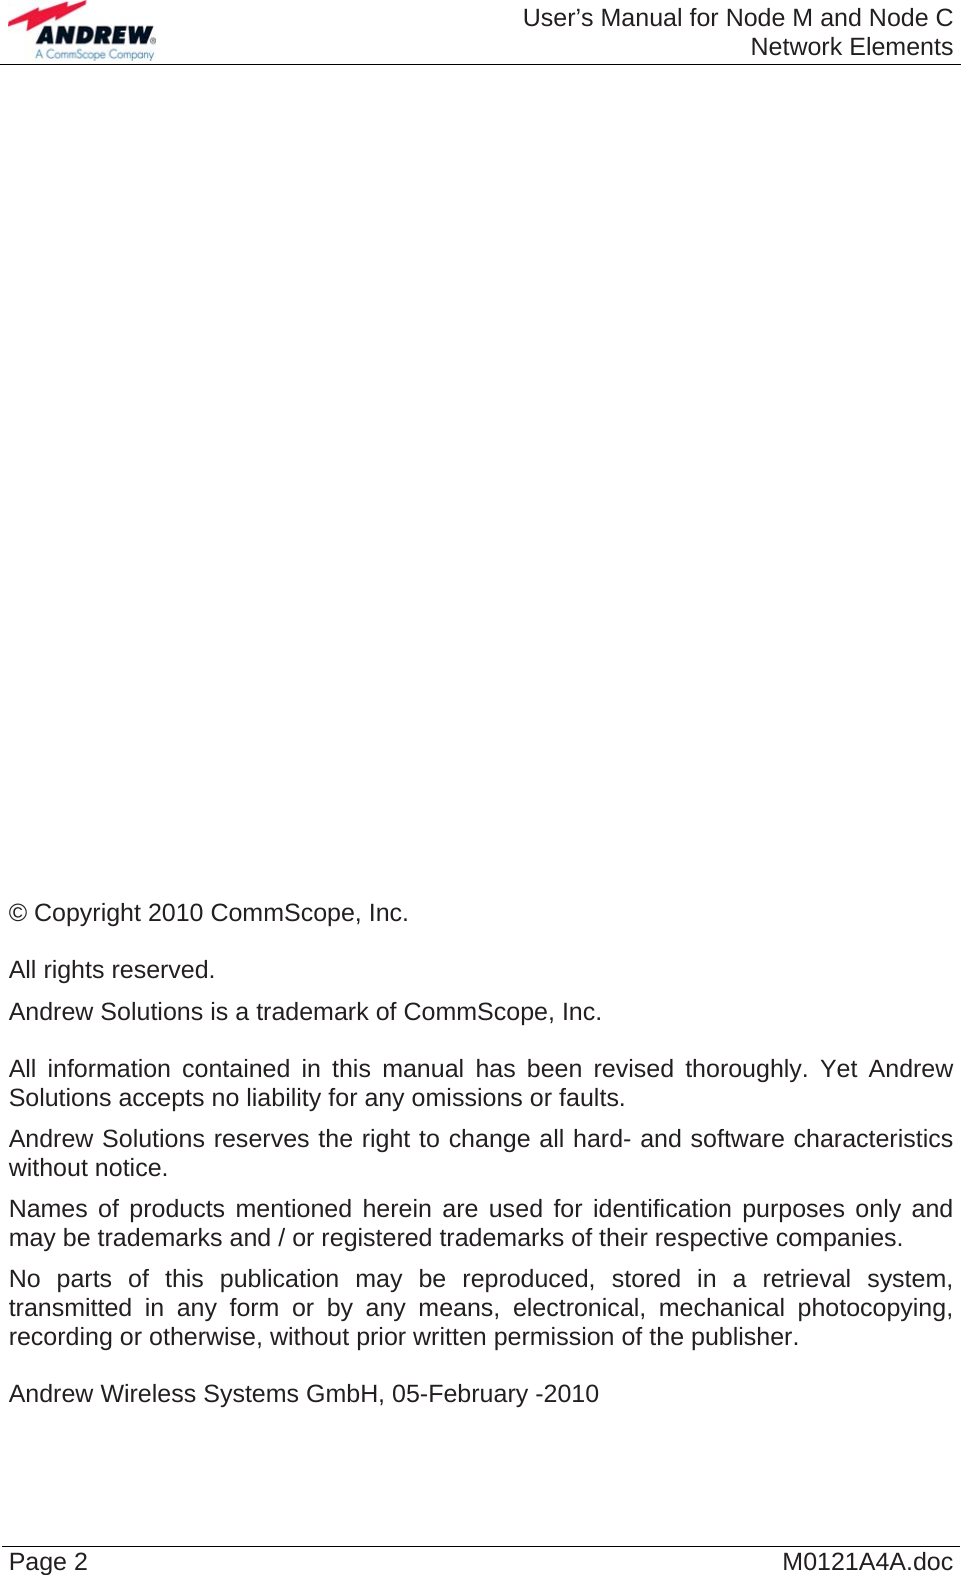  User’s Manual for Node M and Node CNetwork Elements Page 2  M0121A4A.doc                             © Copyright 2010 CommScope, Inc.  All rights reserved. Andrew Solutions is a trademark of CommScope, Inc.  All information contained in this manual has been revised thoroughly. Yet Andrew Solutions accepts no liability for any omissions or faults. Andrew Solutions reserves the right to change all hard- and software characteristics without notice. Names of products mentioned herein are used for identification purposes only and may be trademarks and / or registered trademarks of their respective companies. No parts of this publication may be reproduced, stored in a retrieval system, transmitted in any form or by any means, electronical, mechanical photocopying, recording or otherwise, without prior written permission of the publisher.  Andrew Wireless Systems GmbH, 05-February -2010  